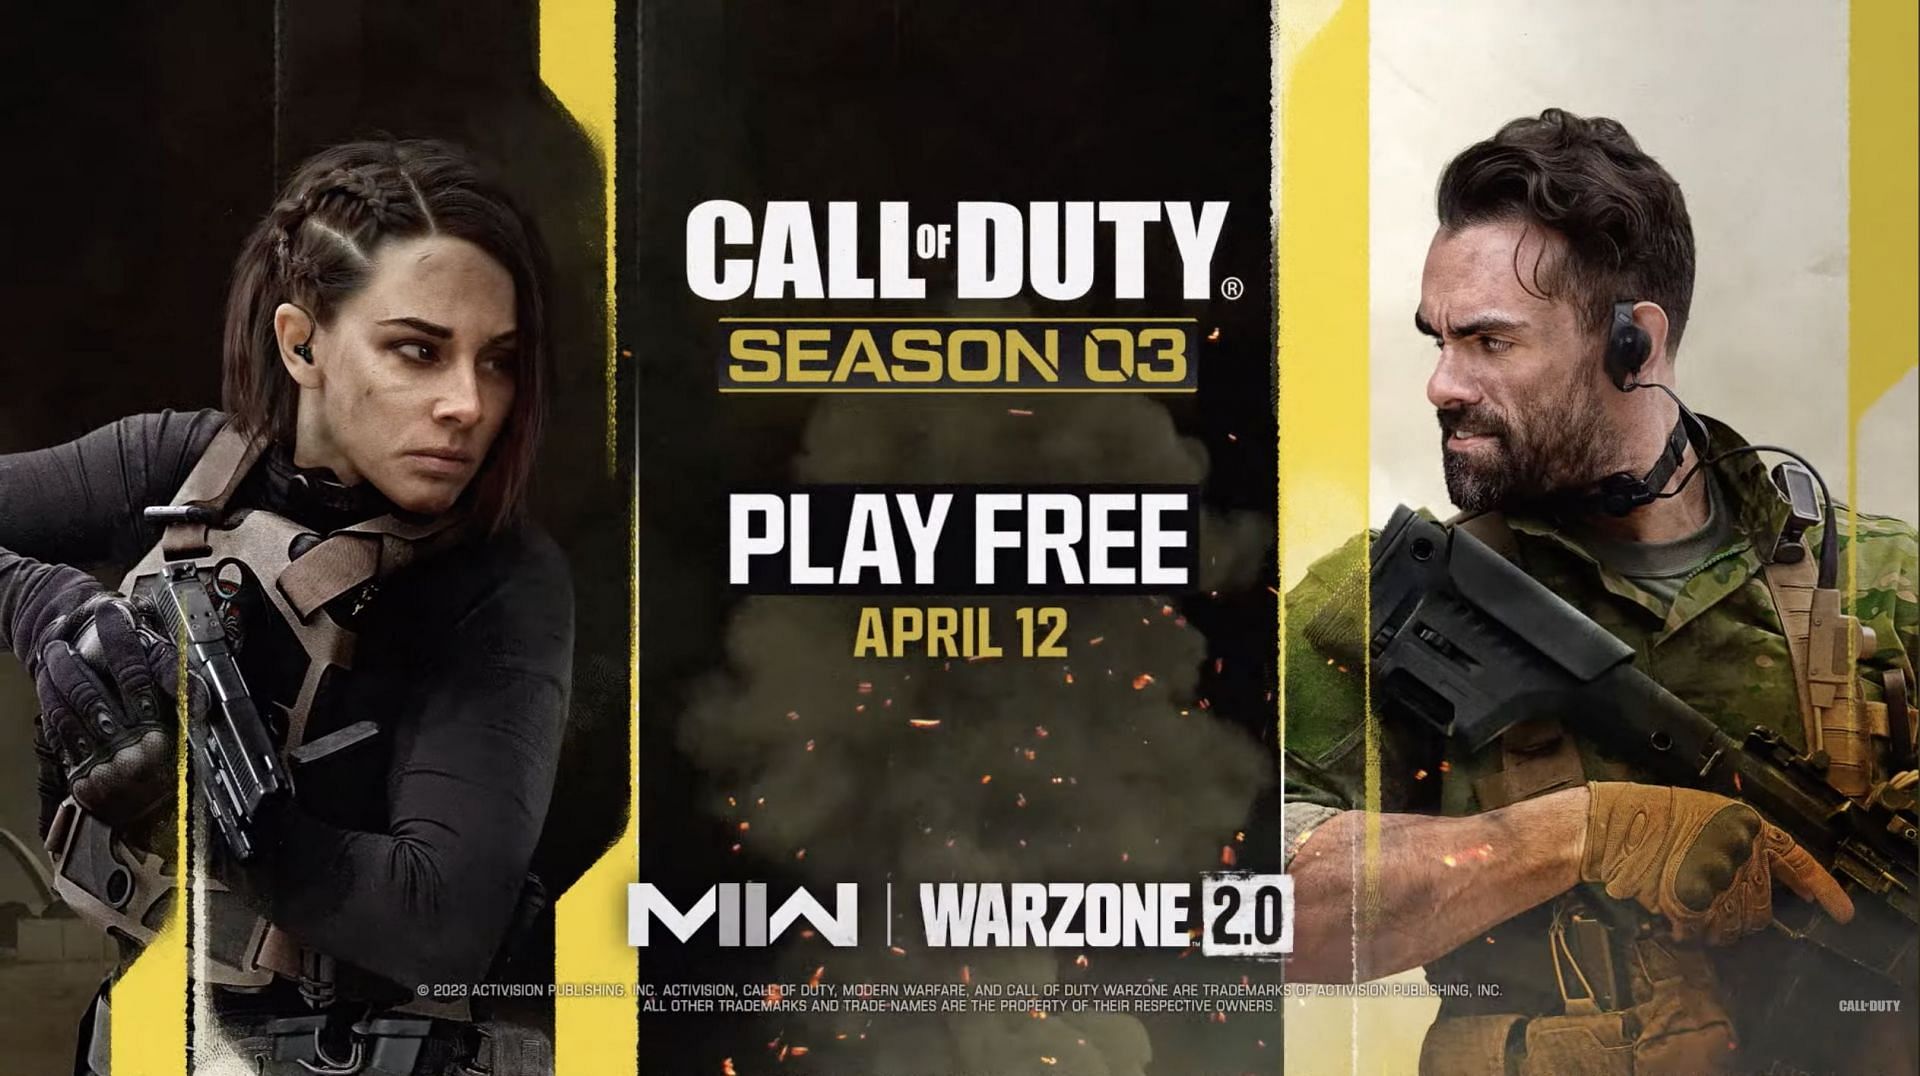 April 12 will see the latest update (Image via Call of Duty on YouTube)